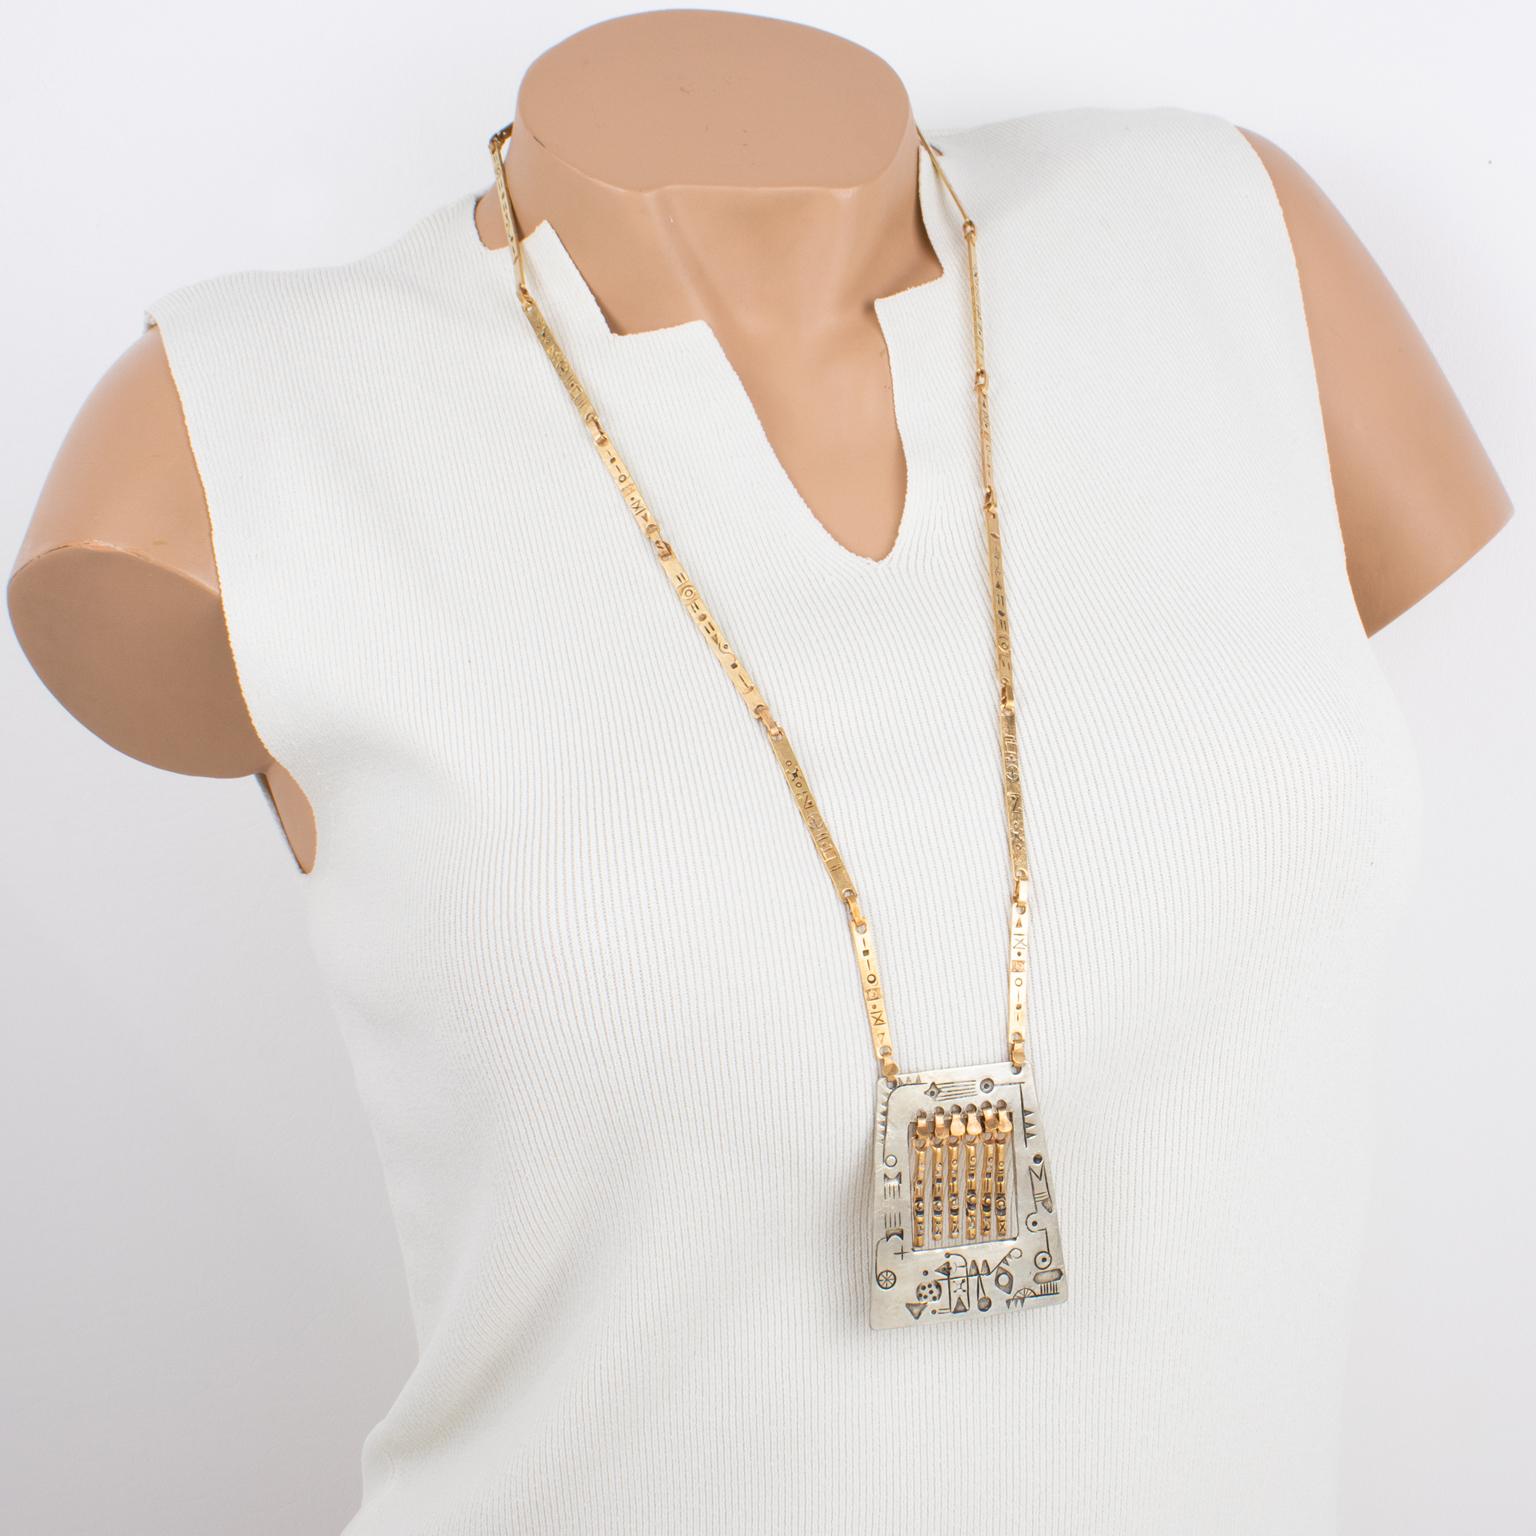 This amazing artisan studio modernist brass and silvered metal link necklace was created in the 1960s. The piece features a long brass link chain ornate with silvered and brass metal pendant with dangling charms. The necklace has a hand-made feel